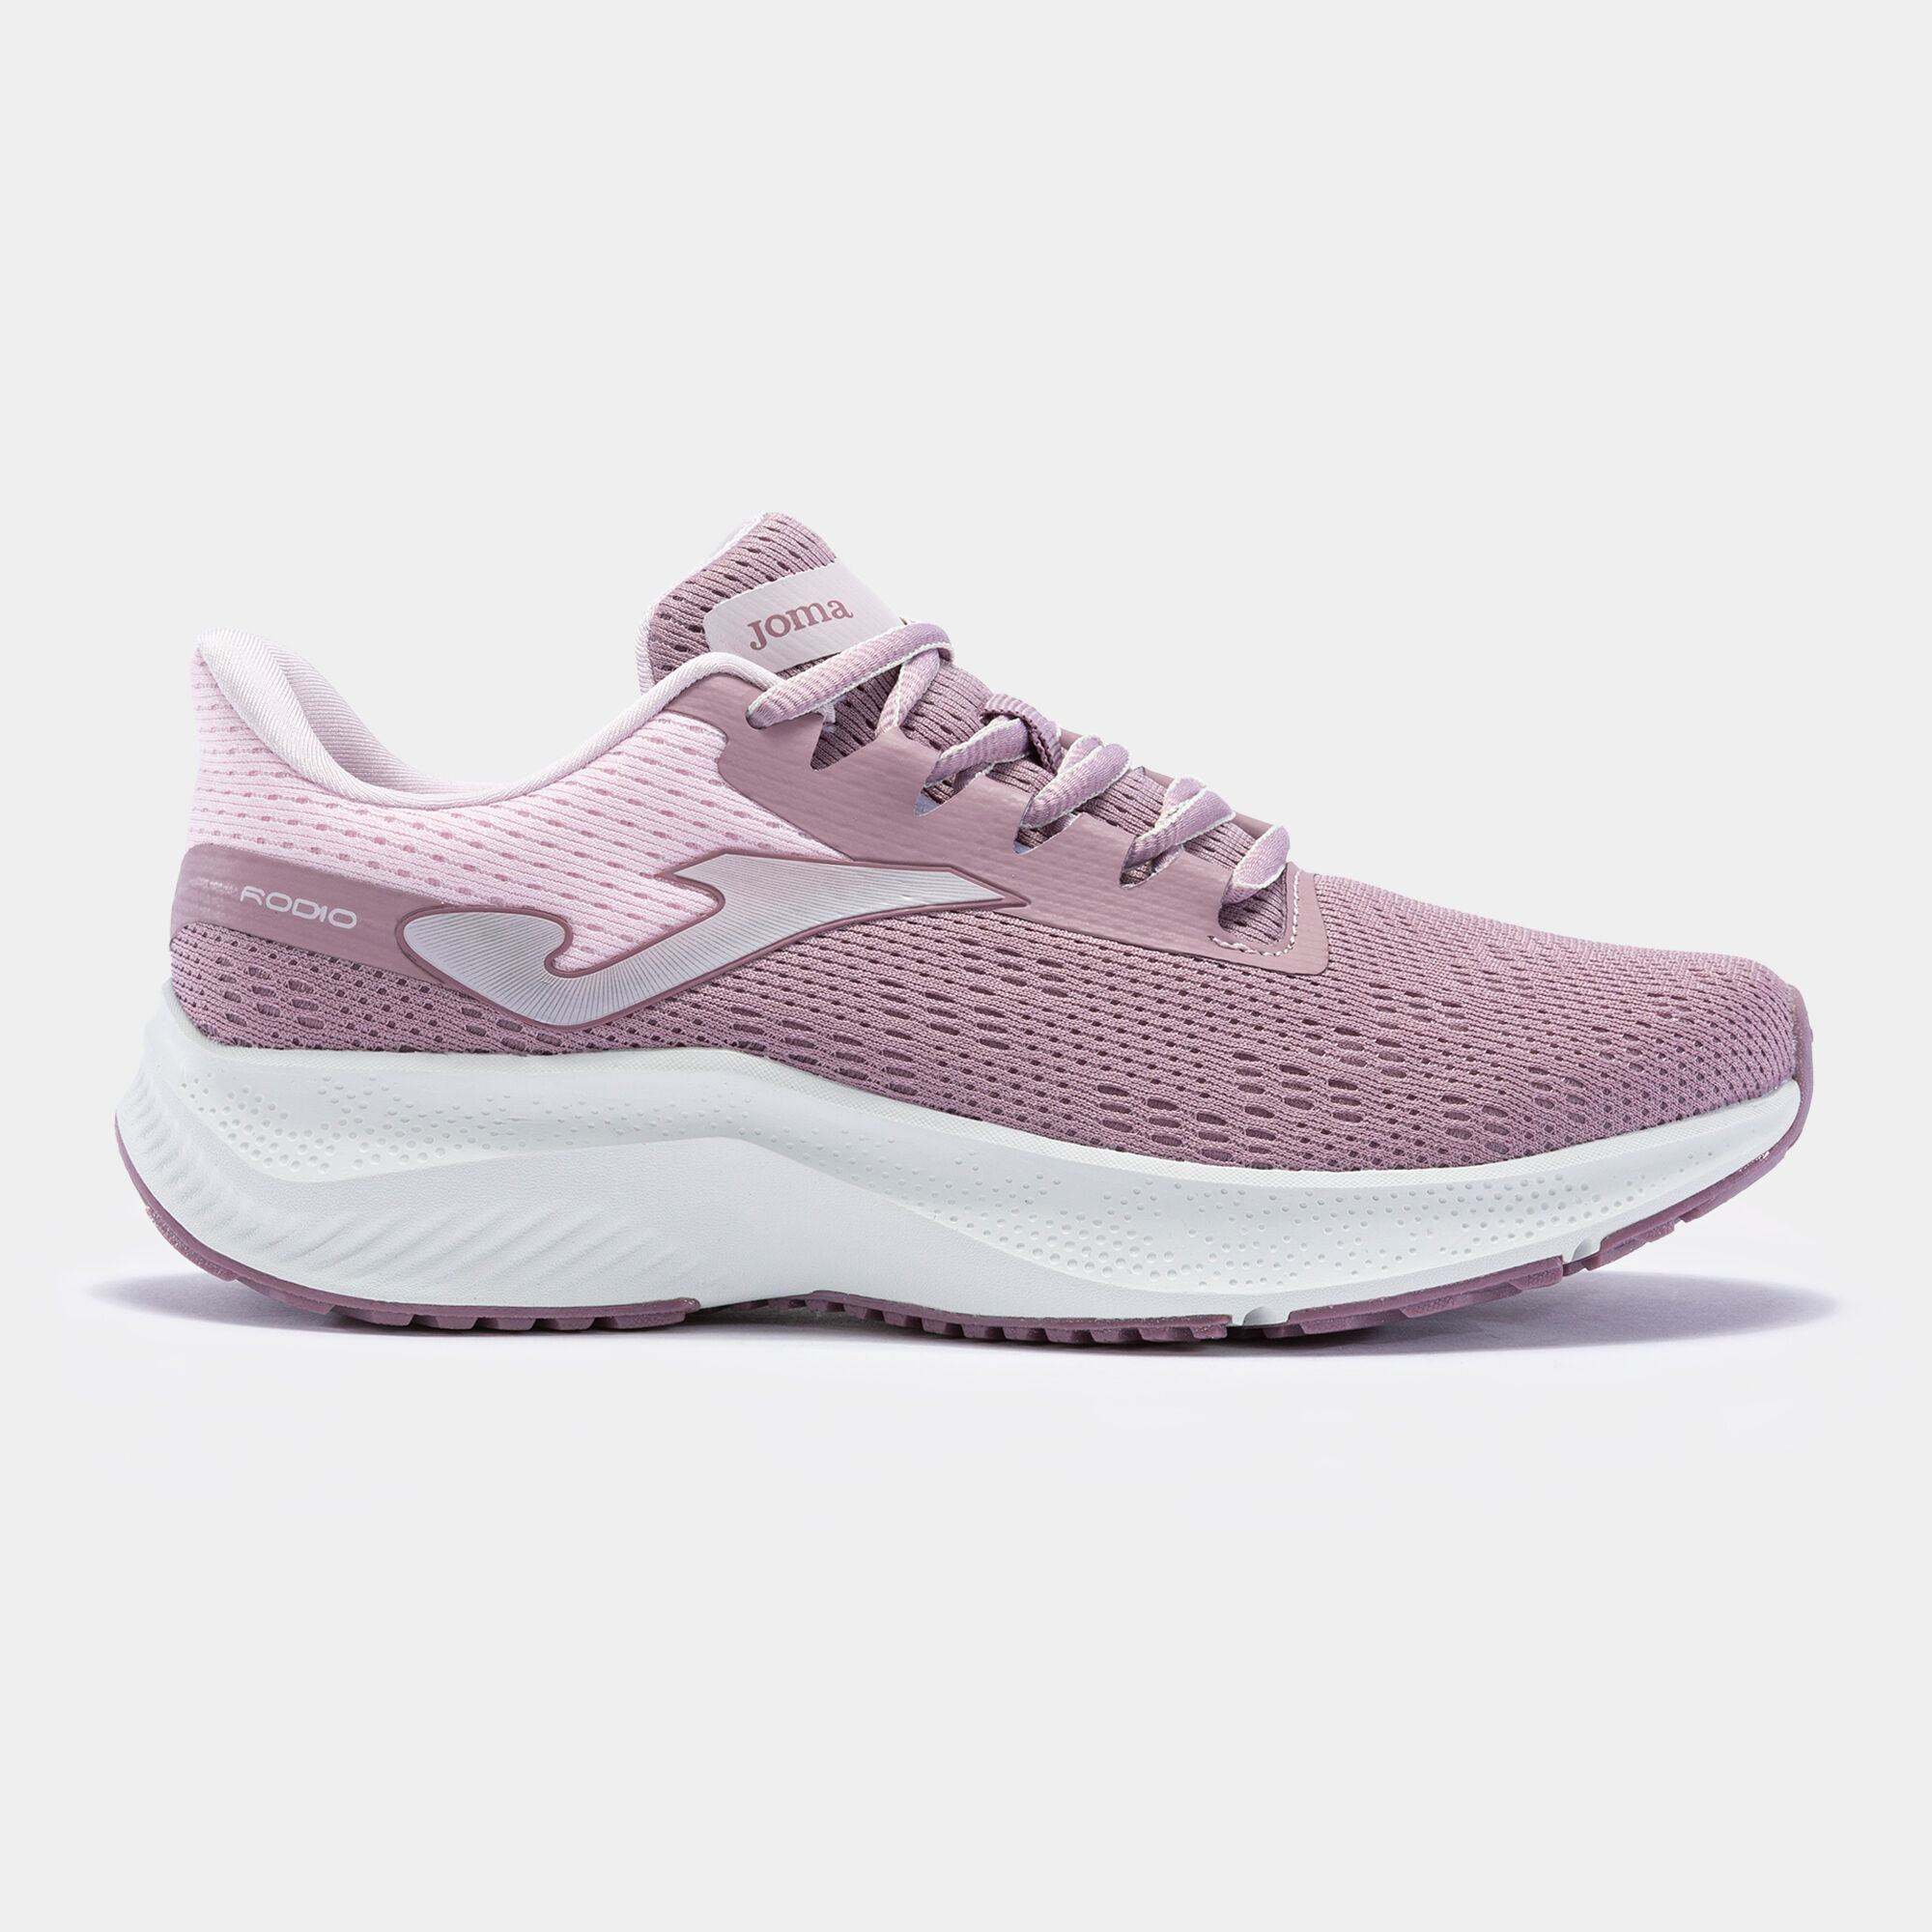 RUNNING SHOES RODIO 22 WOMAN PINK